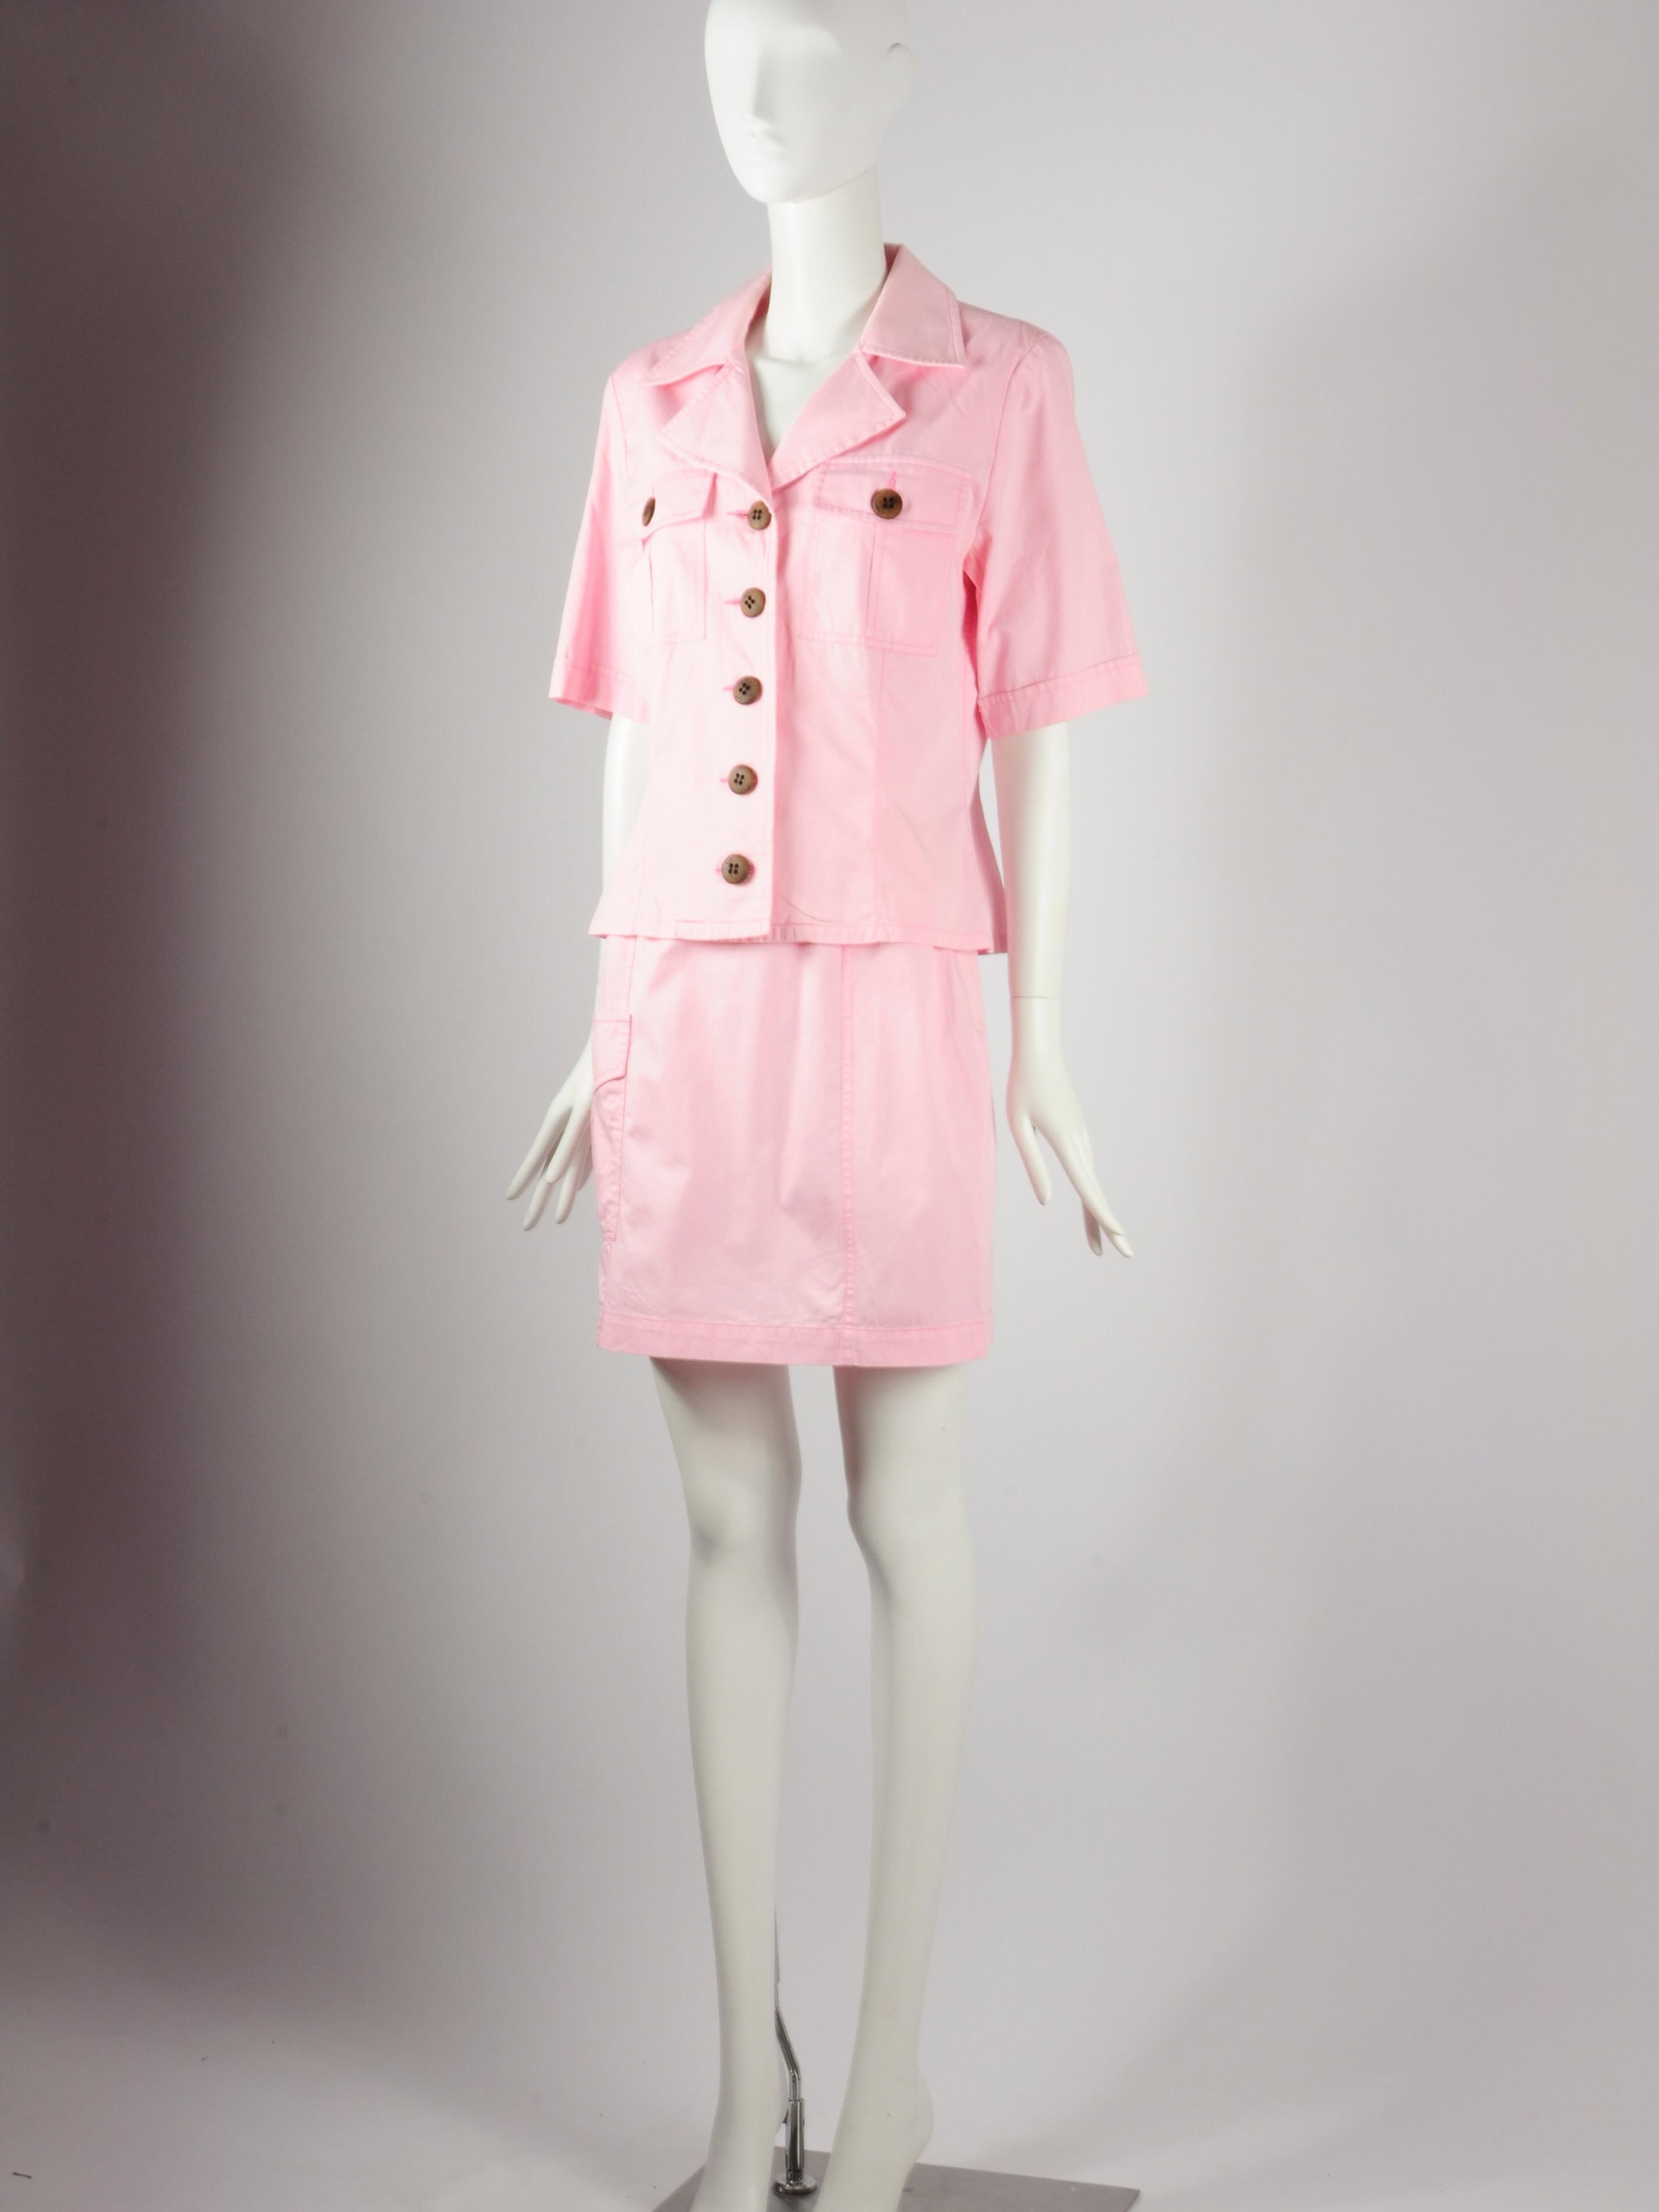 Vintage Yves Saint Laurent saharienne safari inspired two-piece set in baby pink with wooden buttons and big, workwear pockets. The iconic “Saharienne” style was introduced by Yves Saint Laurent in 1967 and was revolutionary. Yves Saint Laurent has